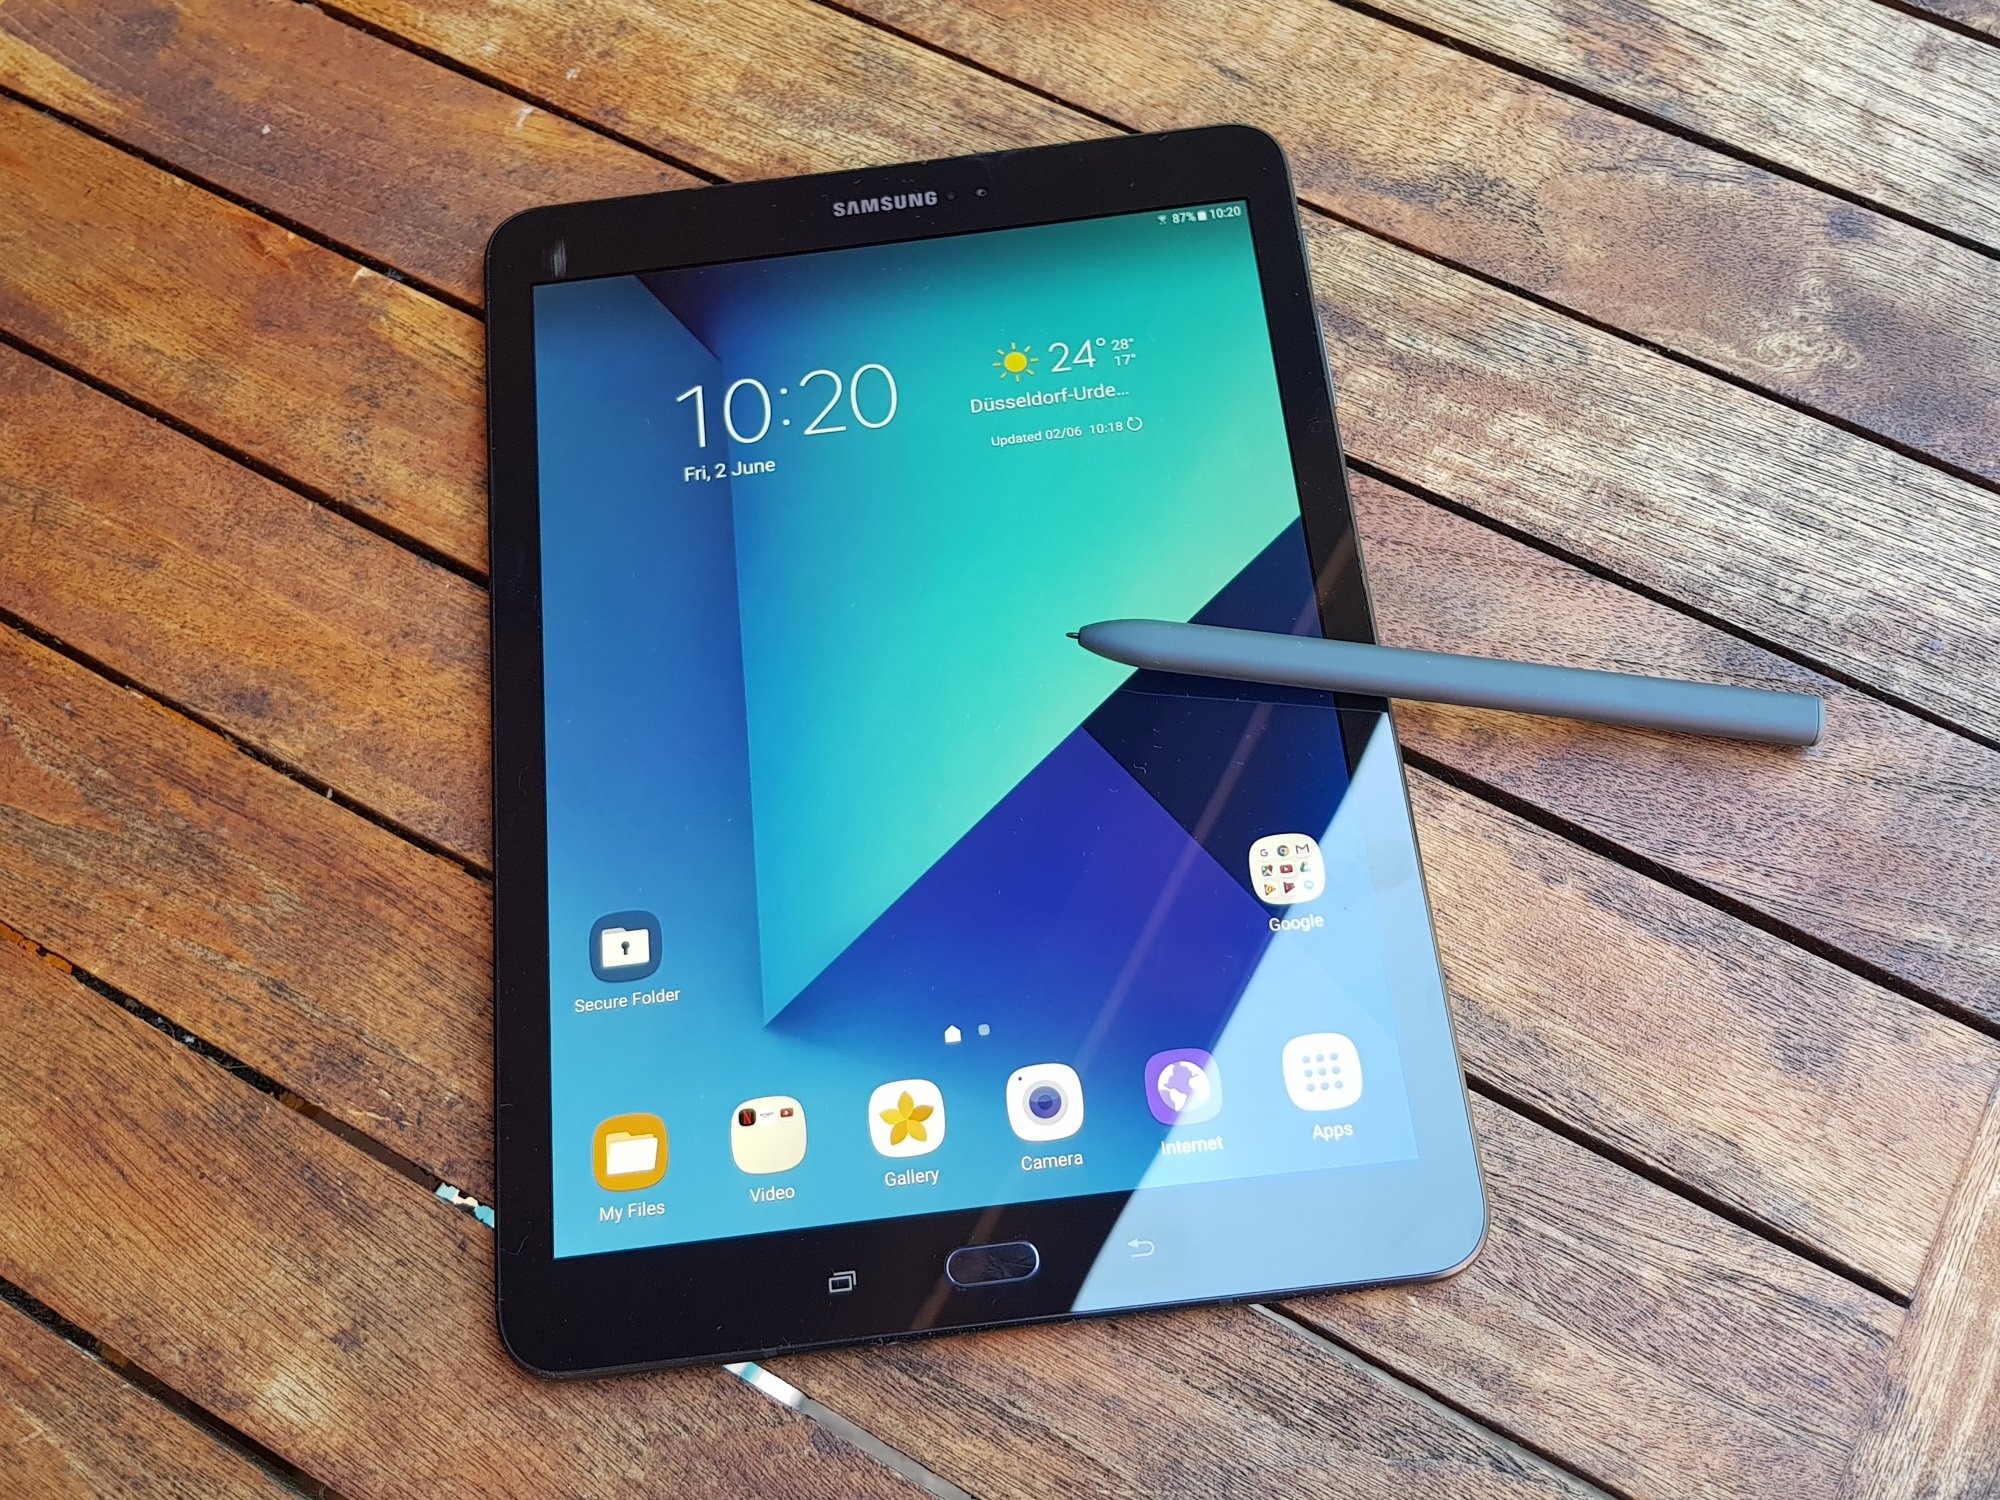 Galaxy Tab S3 gets Android with October security patch in some - SamMobile